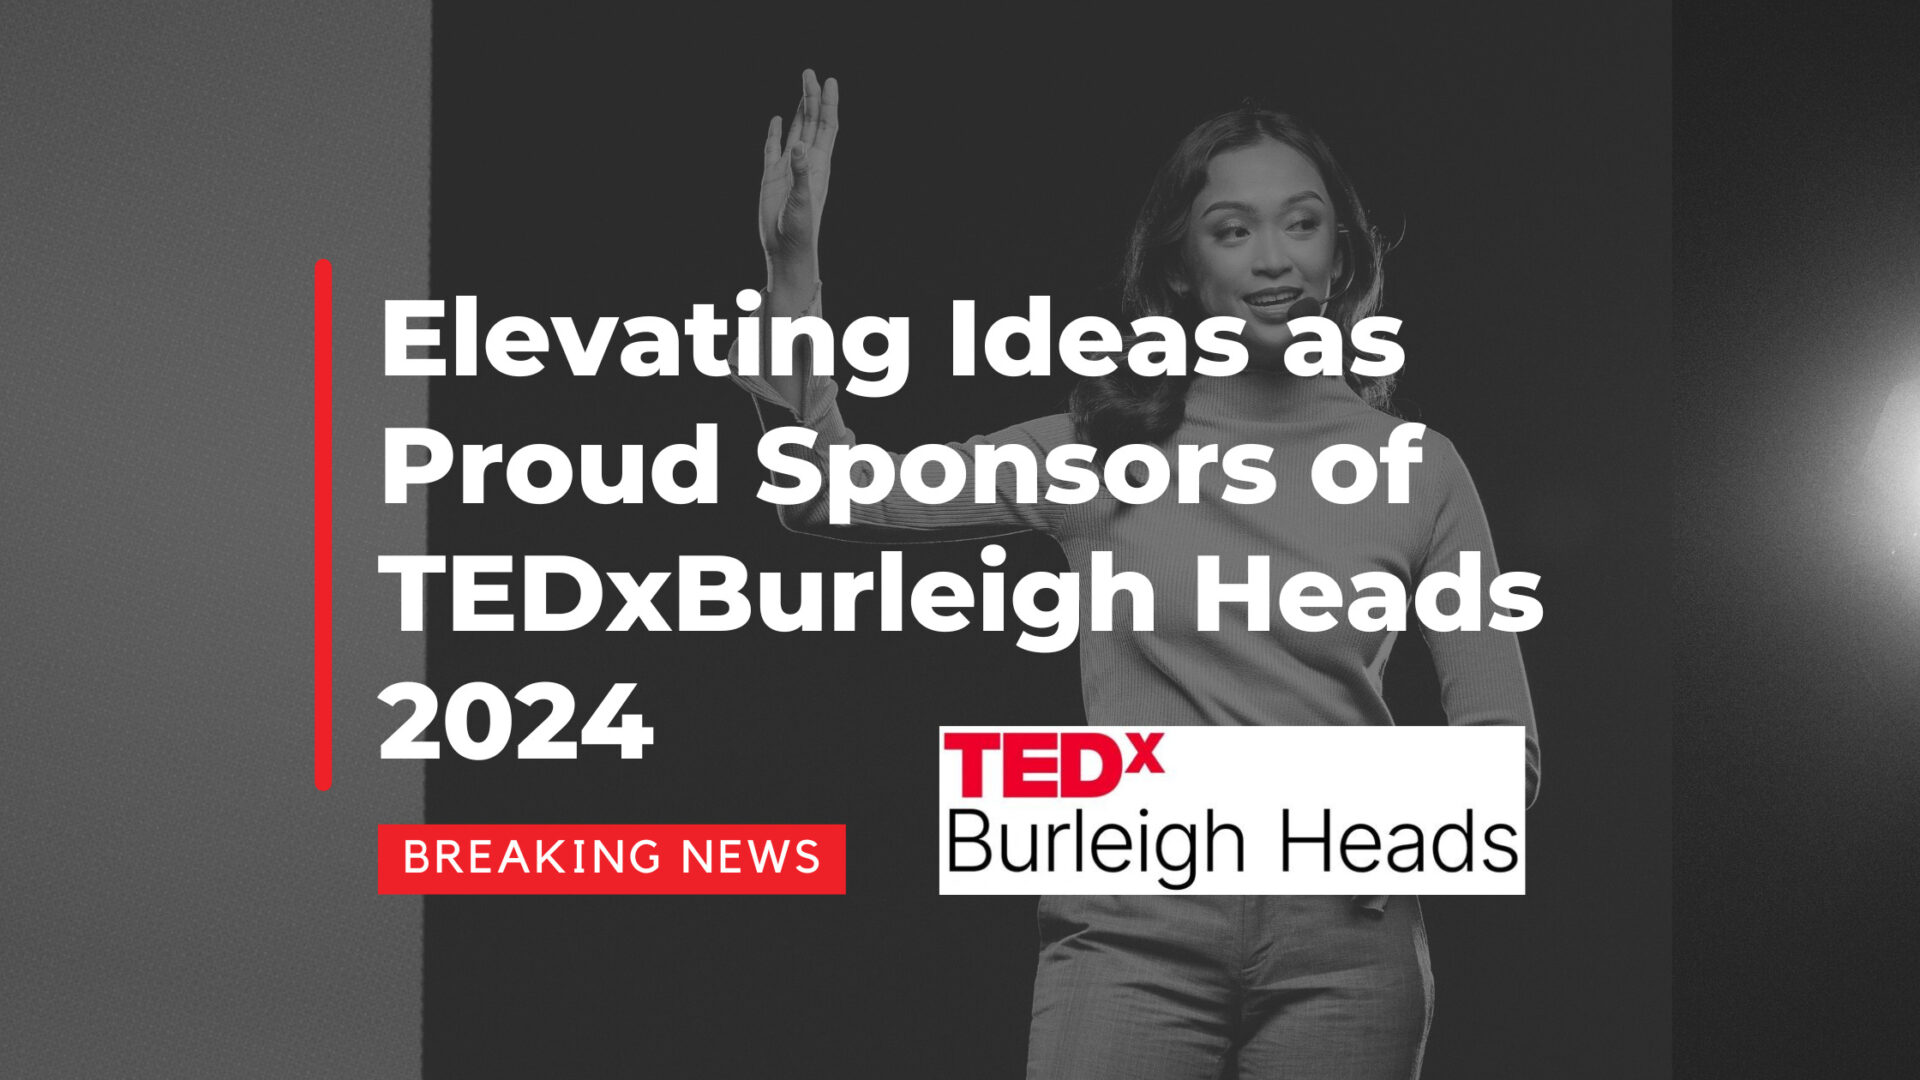 Elevating Ideas as Proud Sponsors of TEDxBurleigh Heads 2024